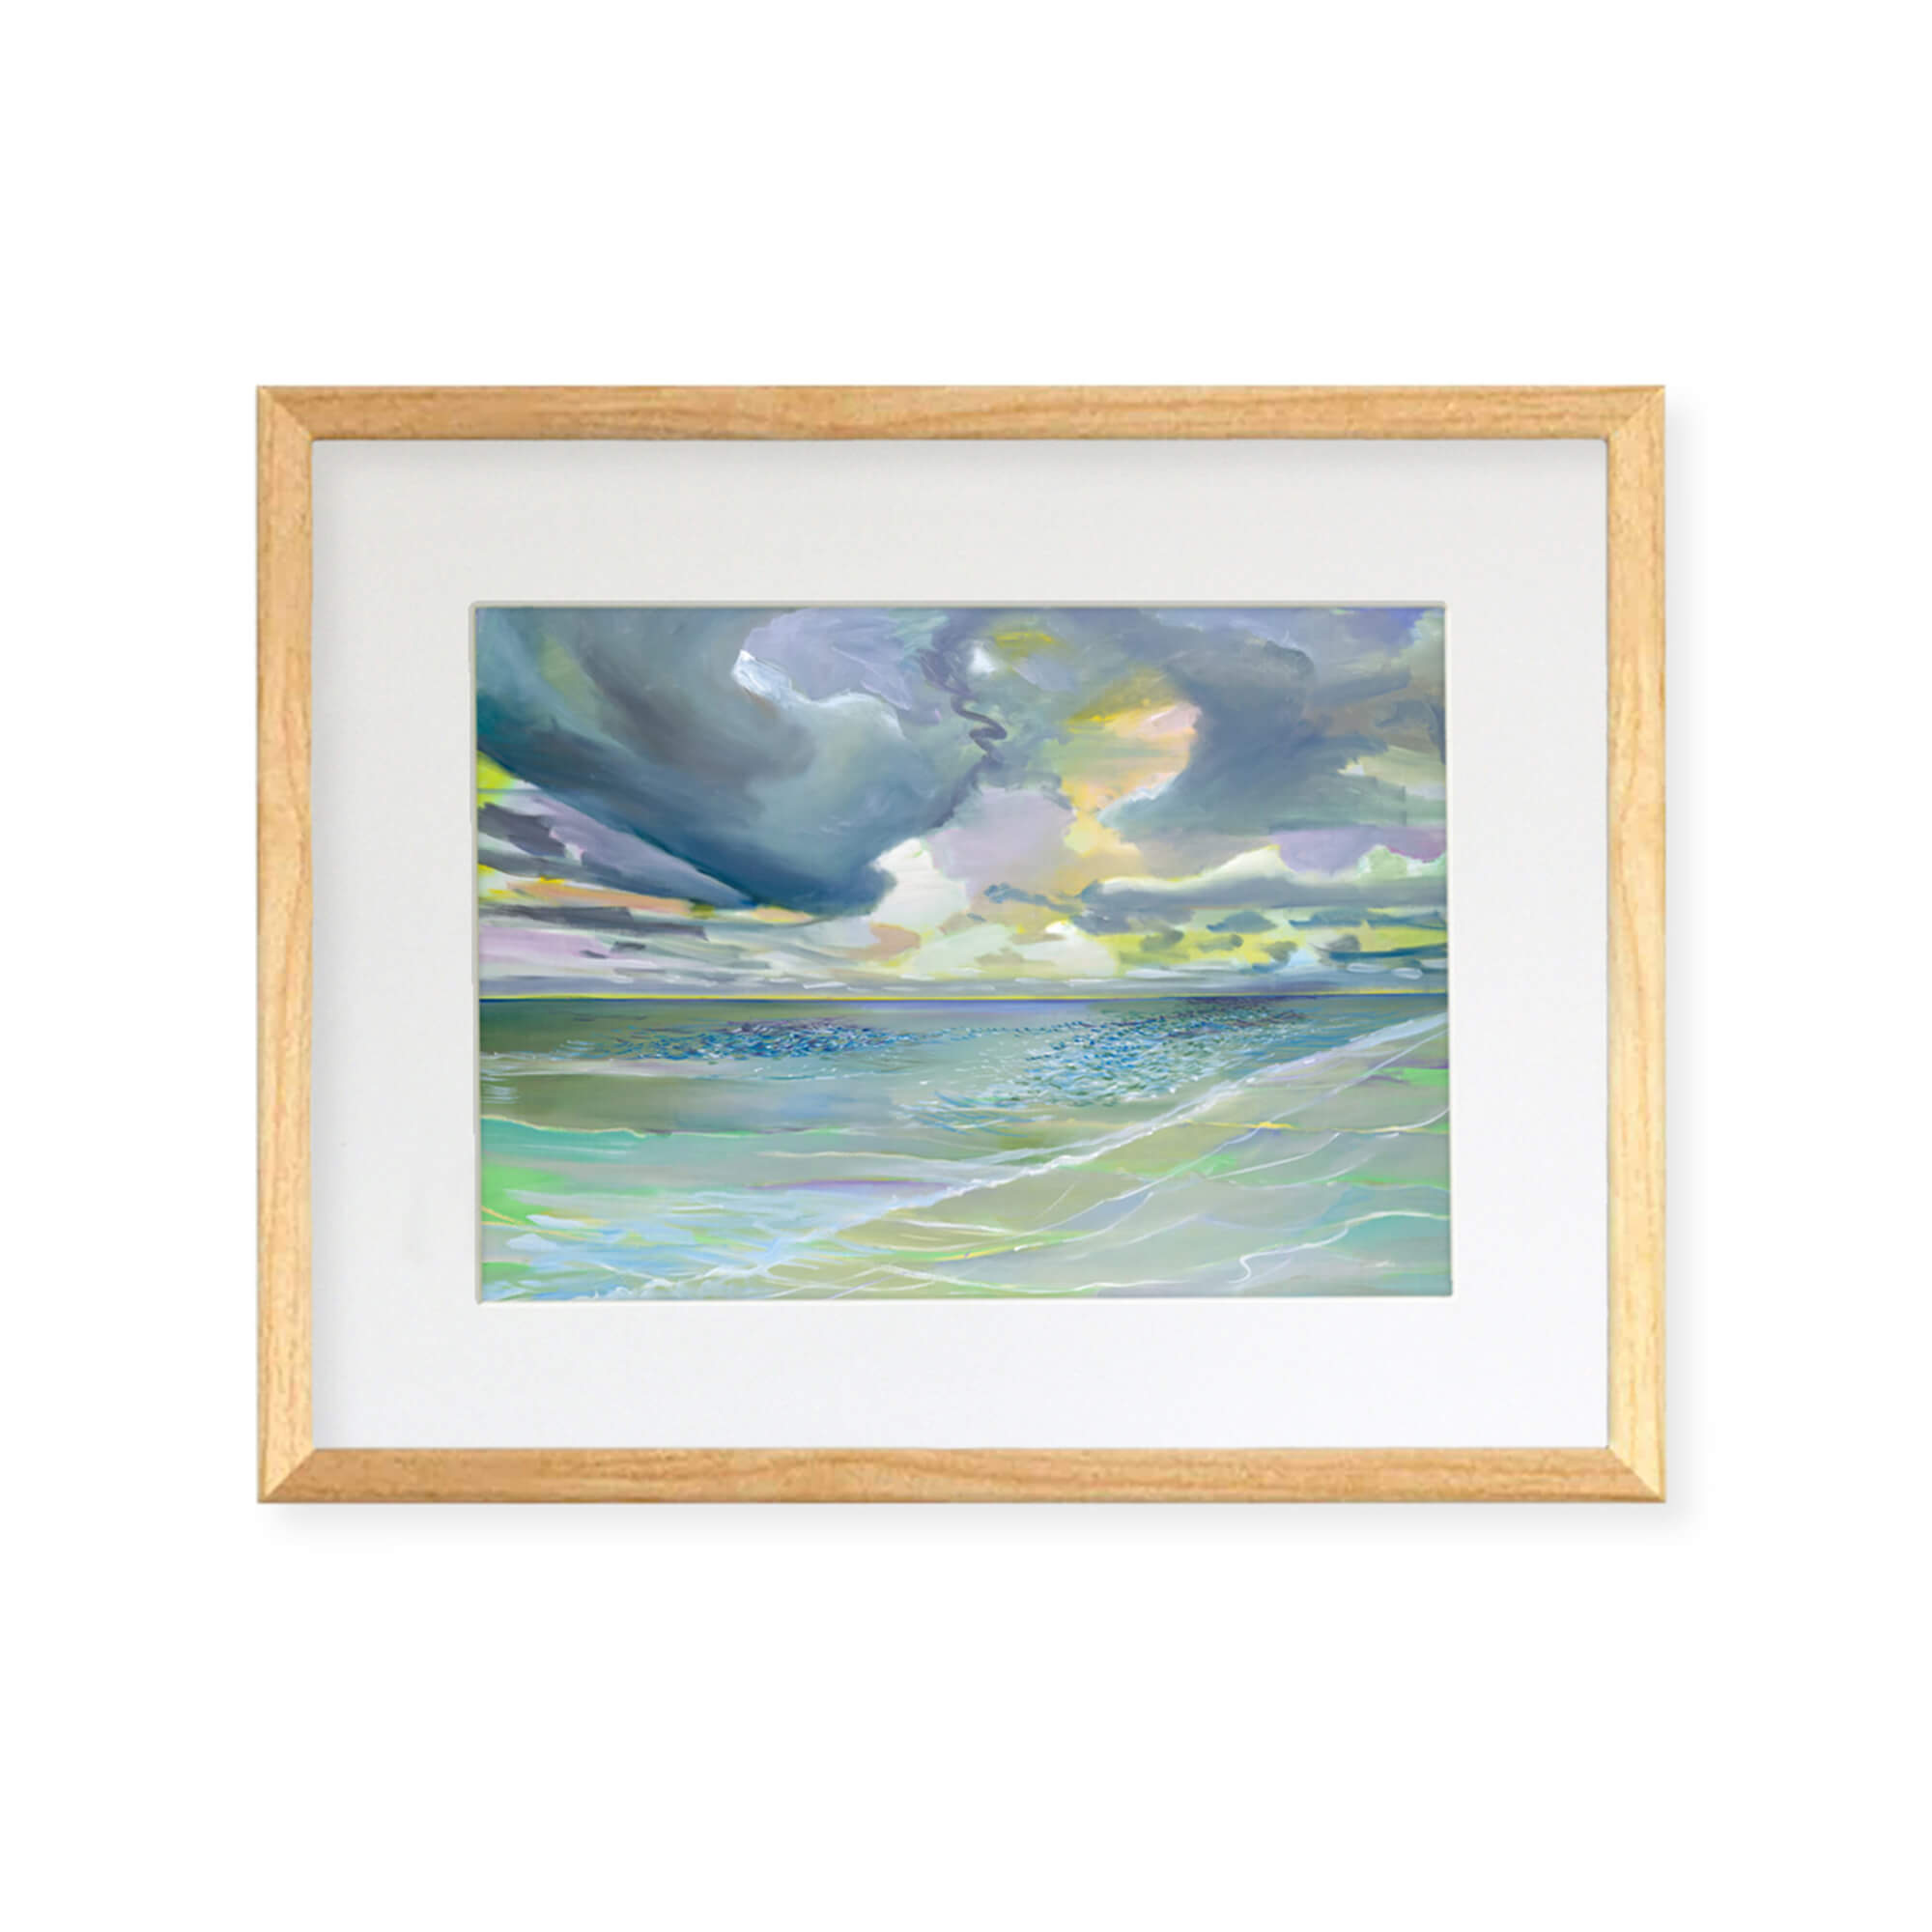  Framed matted art print of a serene seascape with the water reflecting yellow, green, blue, and teal hues by Hawaii artist Saumolia Puapuaga